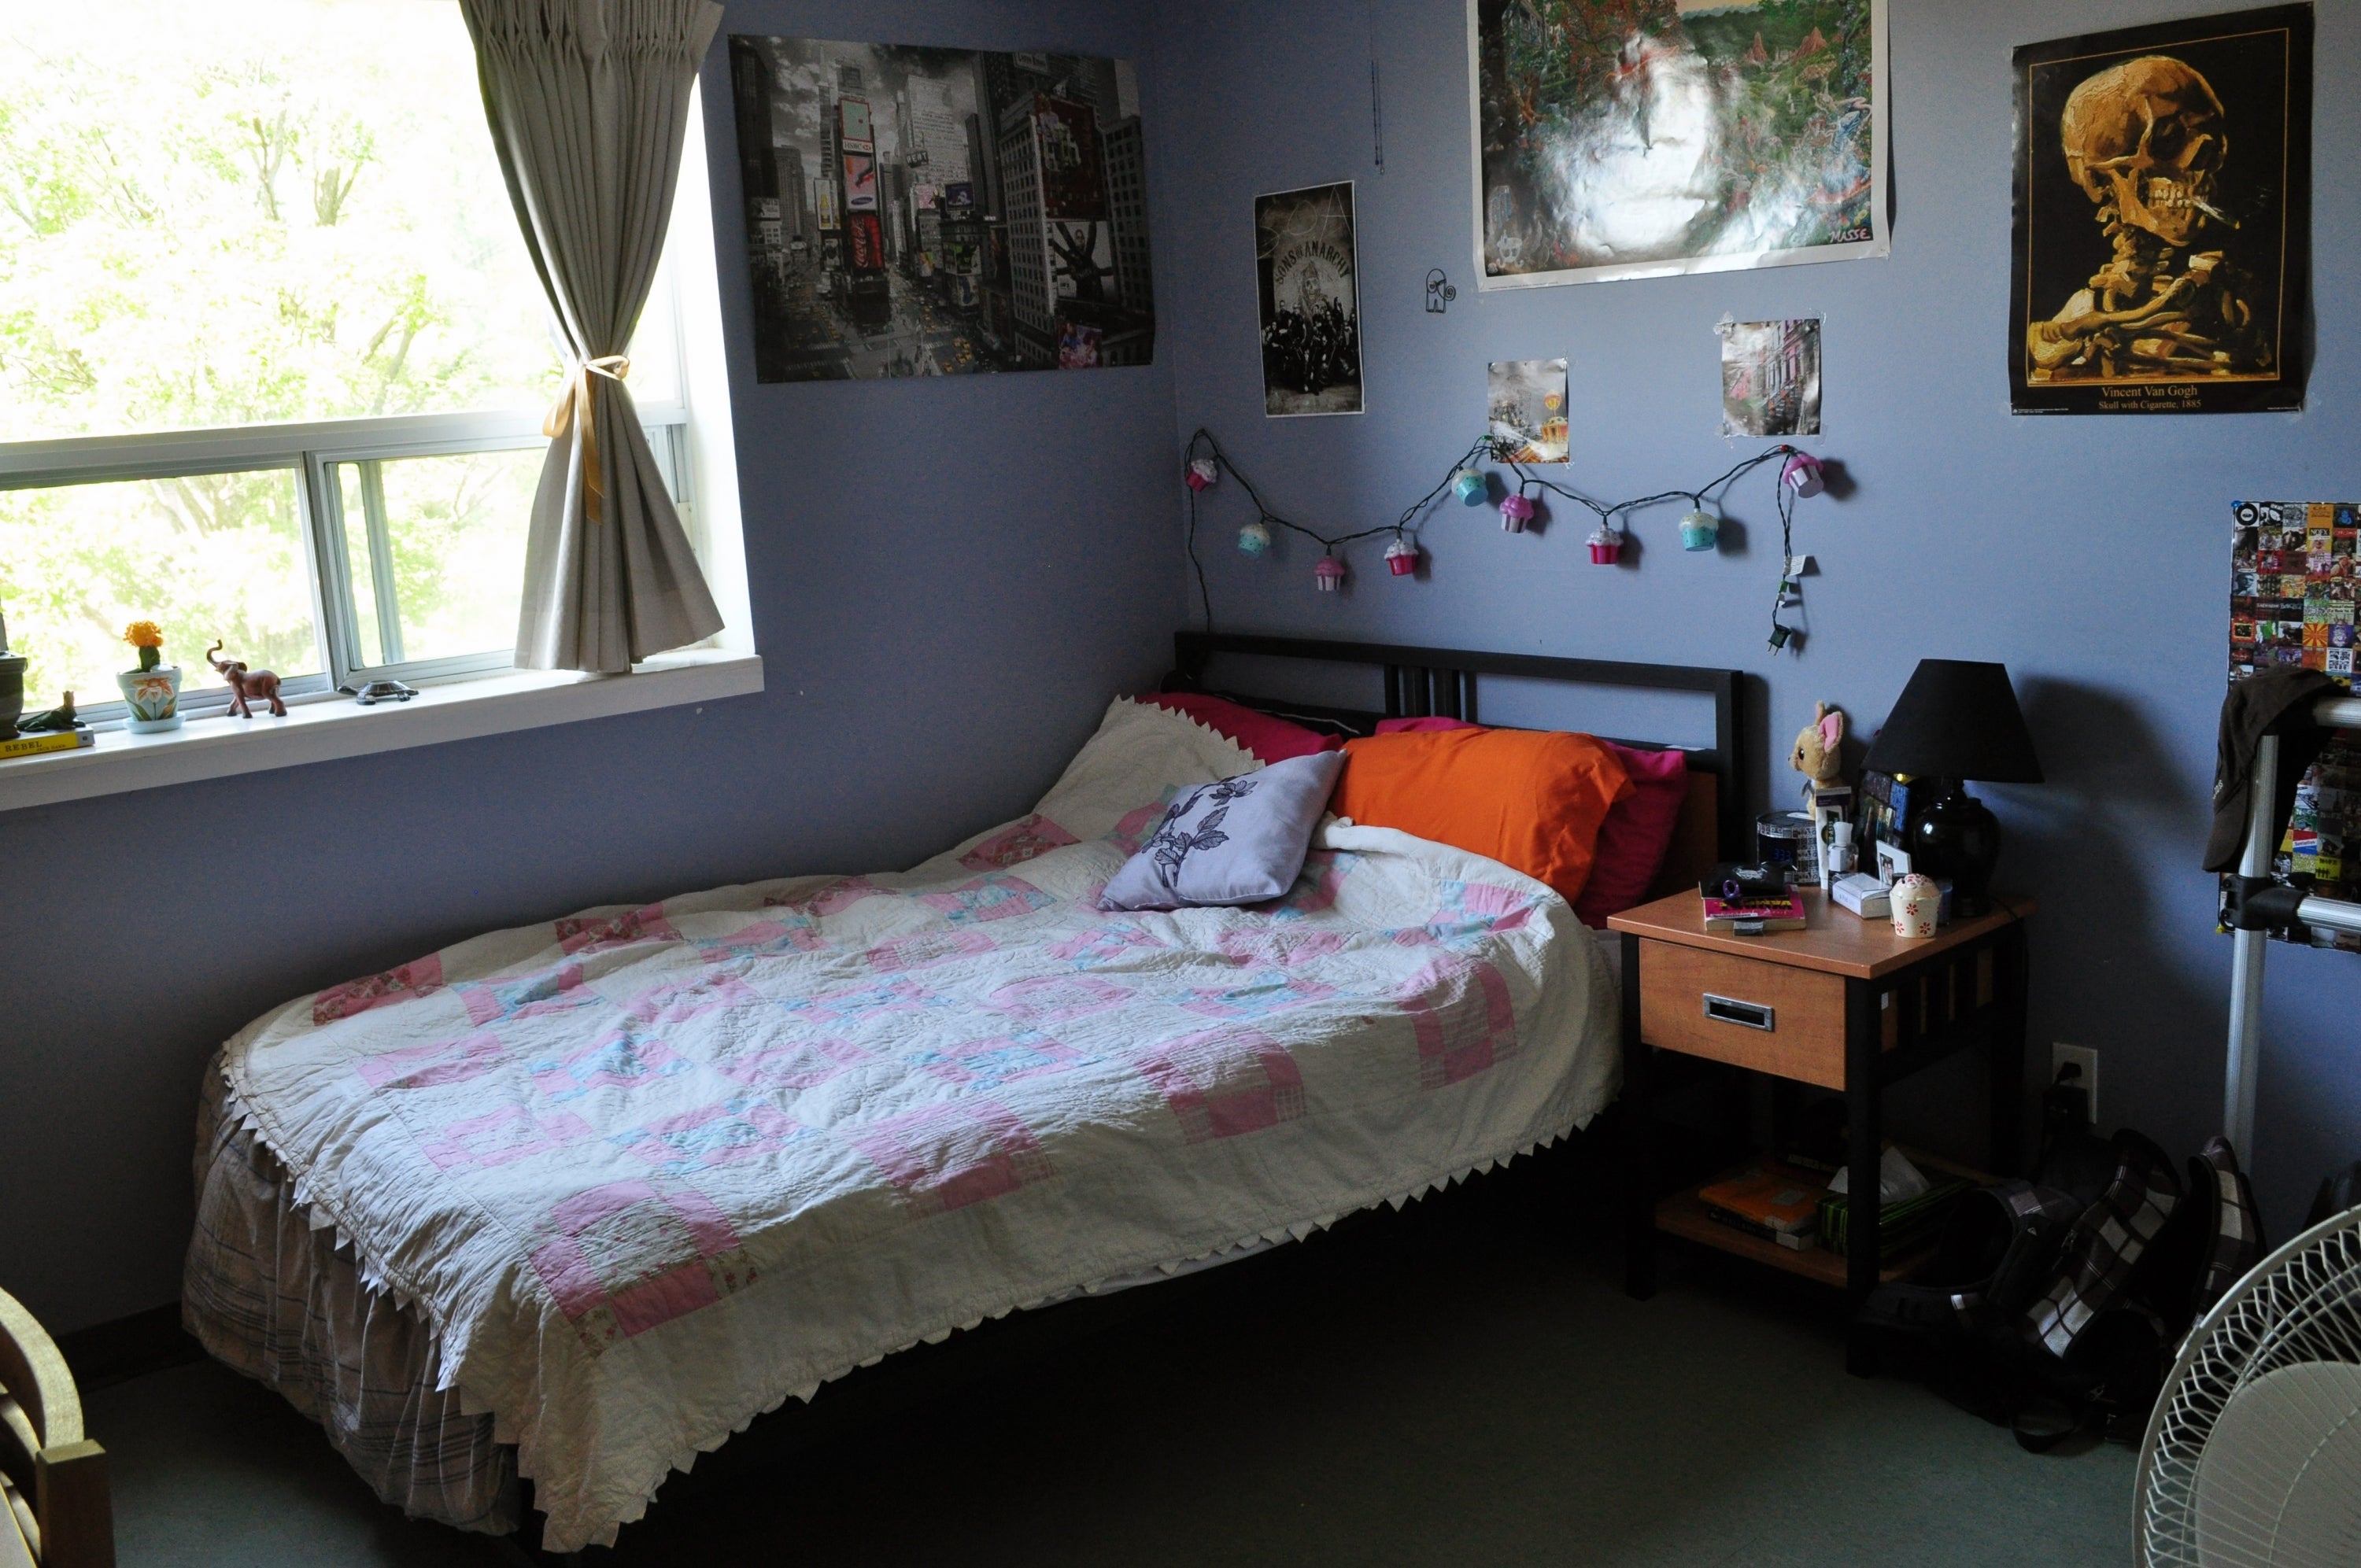 A photo of a decorated bedroom with double bed